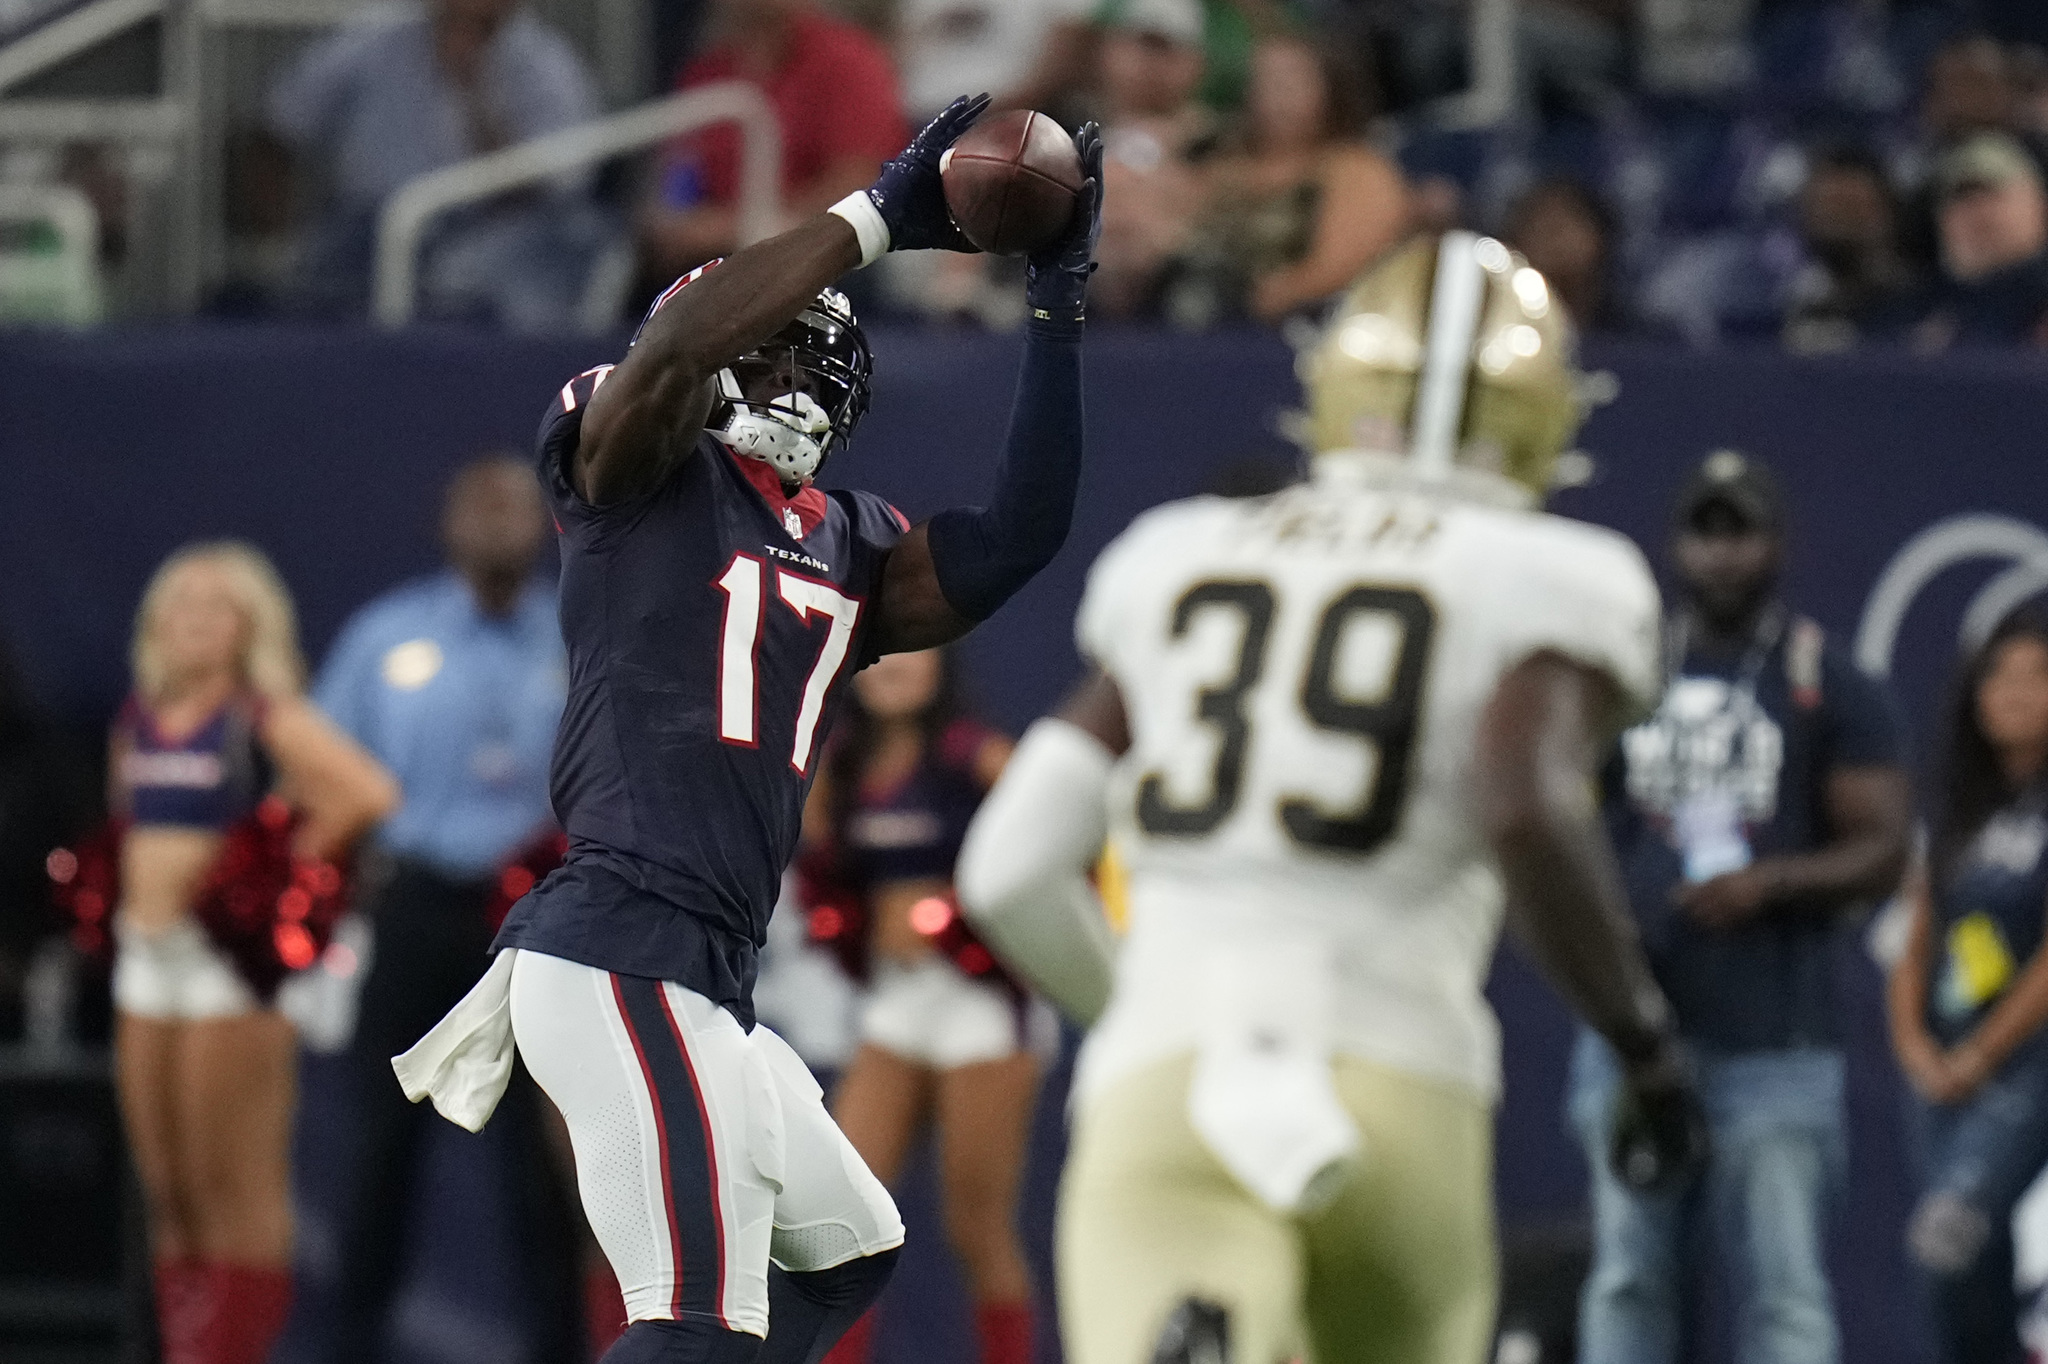 Houston Texans wide receiver makes a catch in front of New Orleans Saints cornerback in their last preseason game.